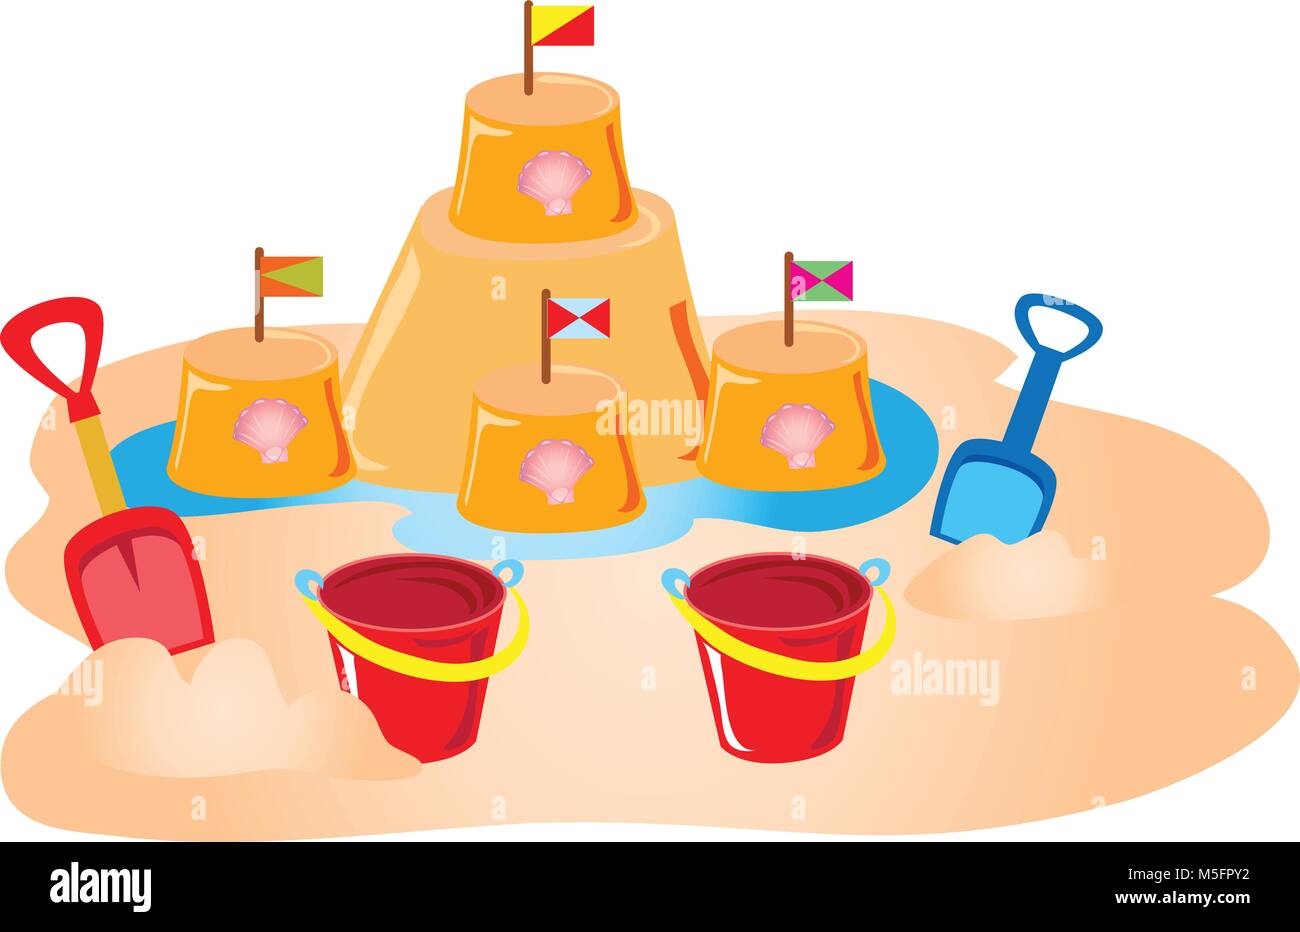 Sandcastle Flag Bucket High Resolution Stock Photography and Images - Alamy